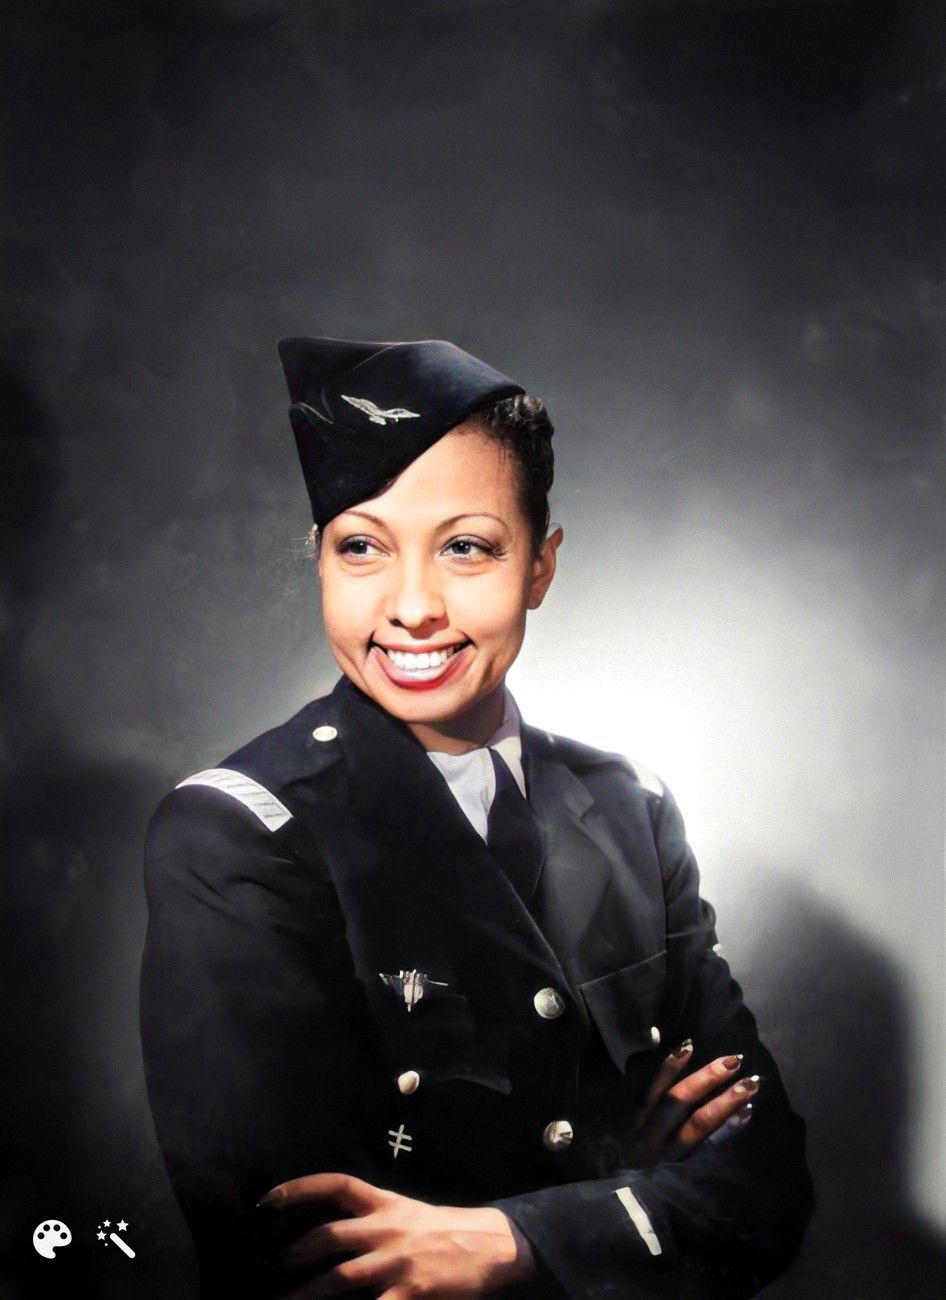 Josephine Baker in her military uniform. Photo colorized with MyHeritage photo tools. Original photo by Studio Harcourt